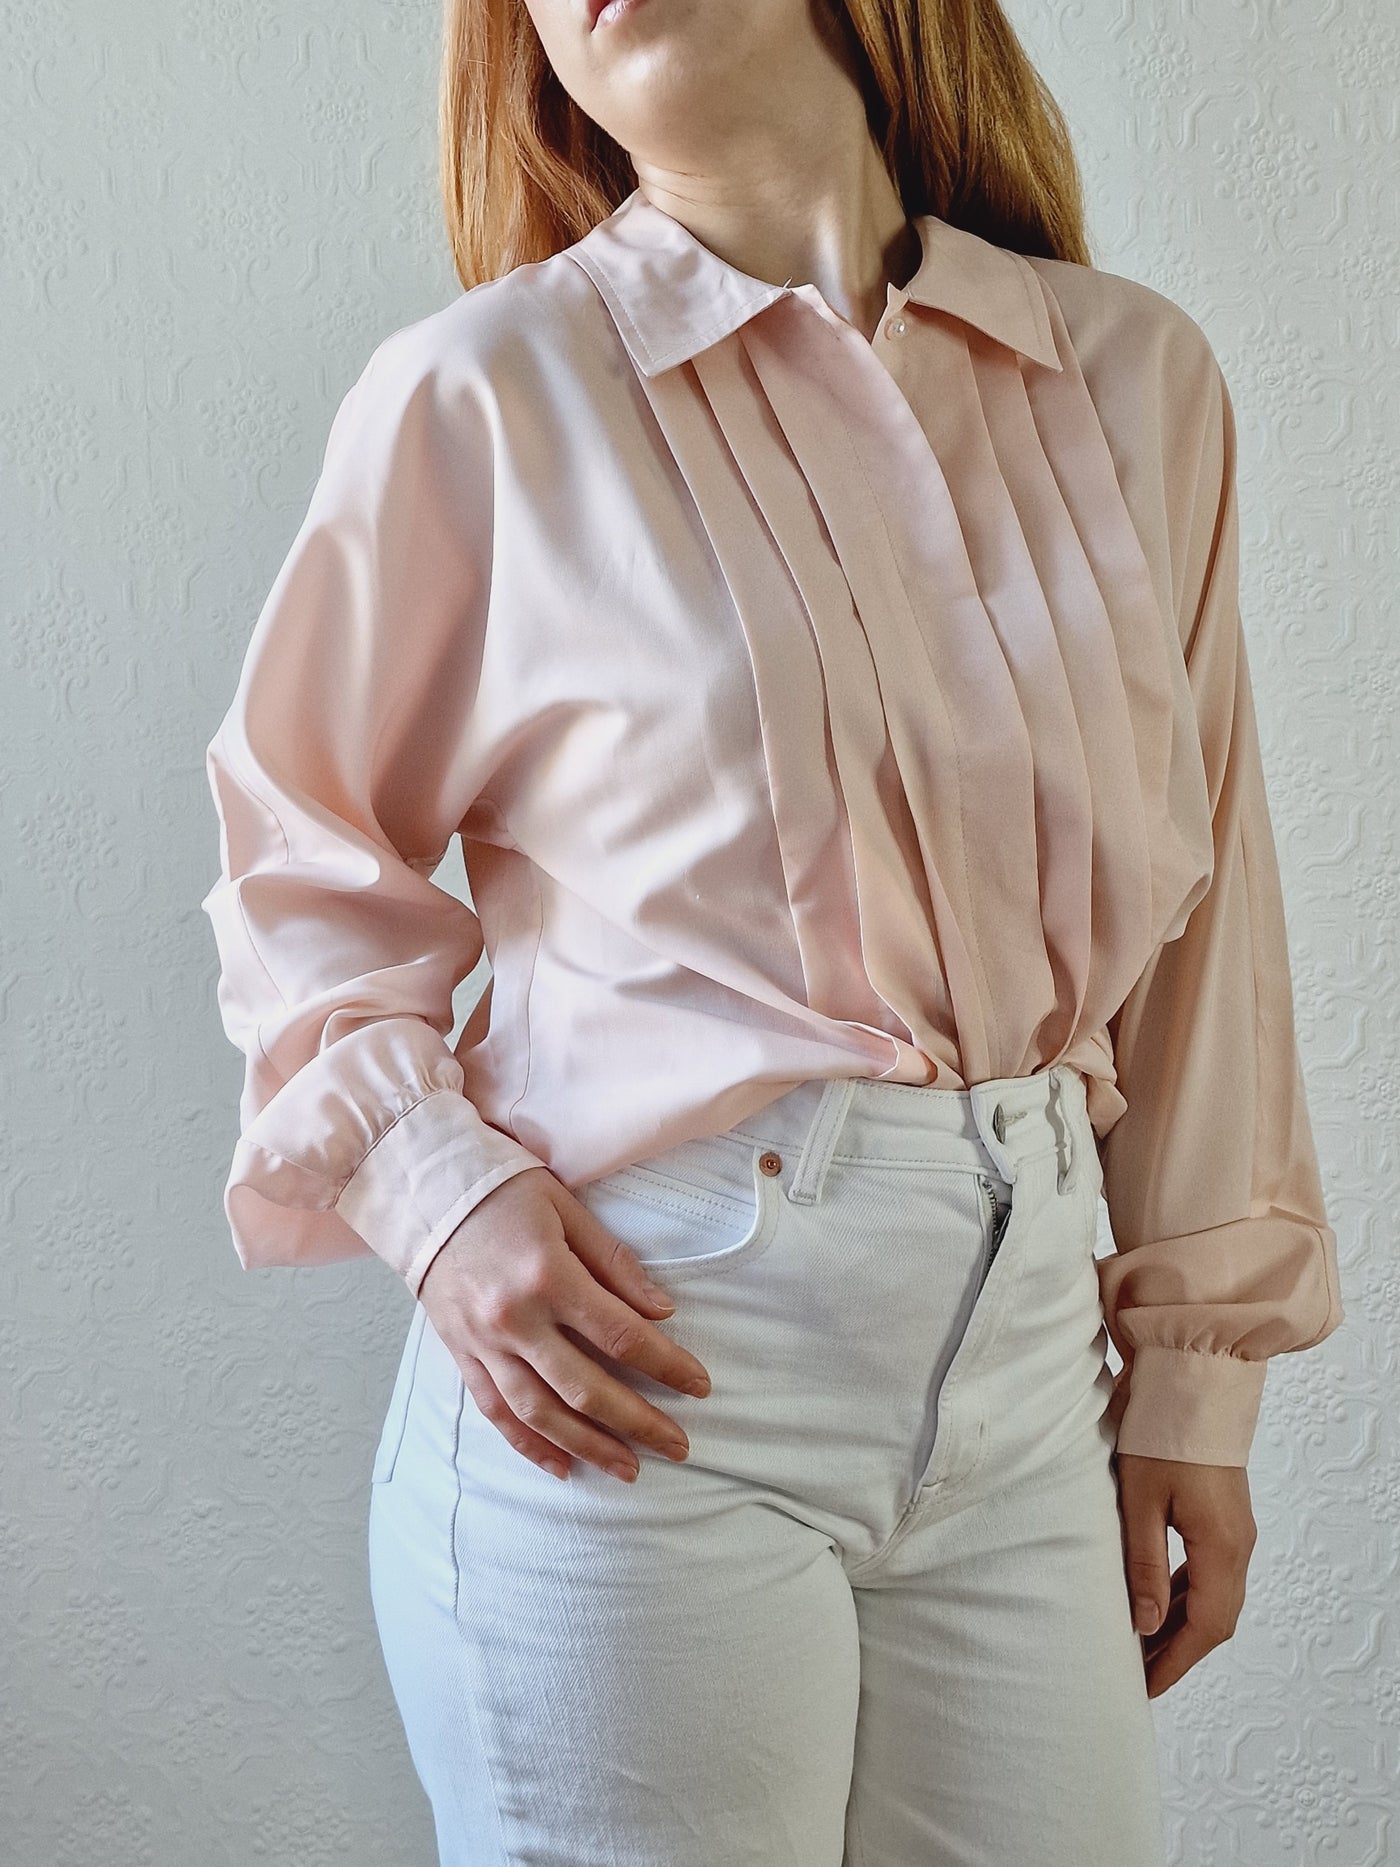 Vintage 80s Light Pink Long Sleeve Blouse With Pleating - S/M